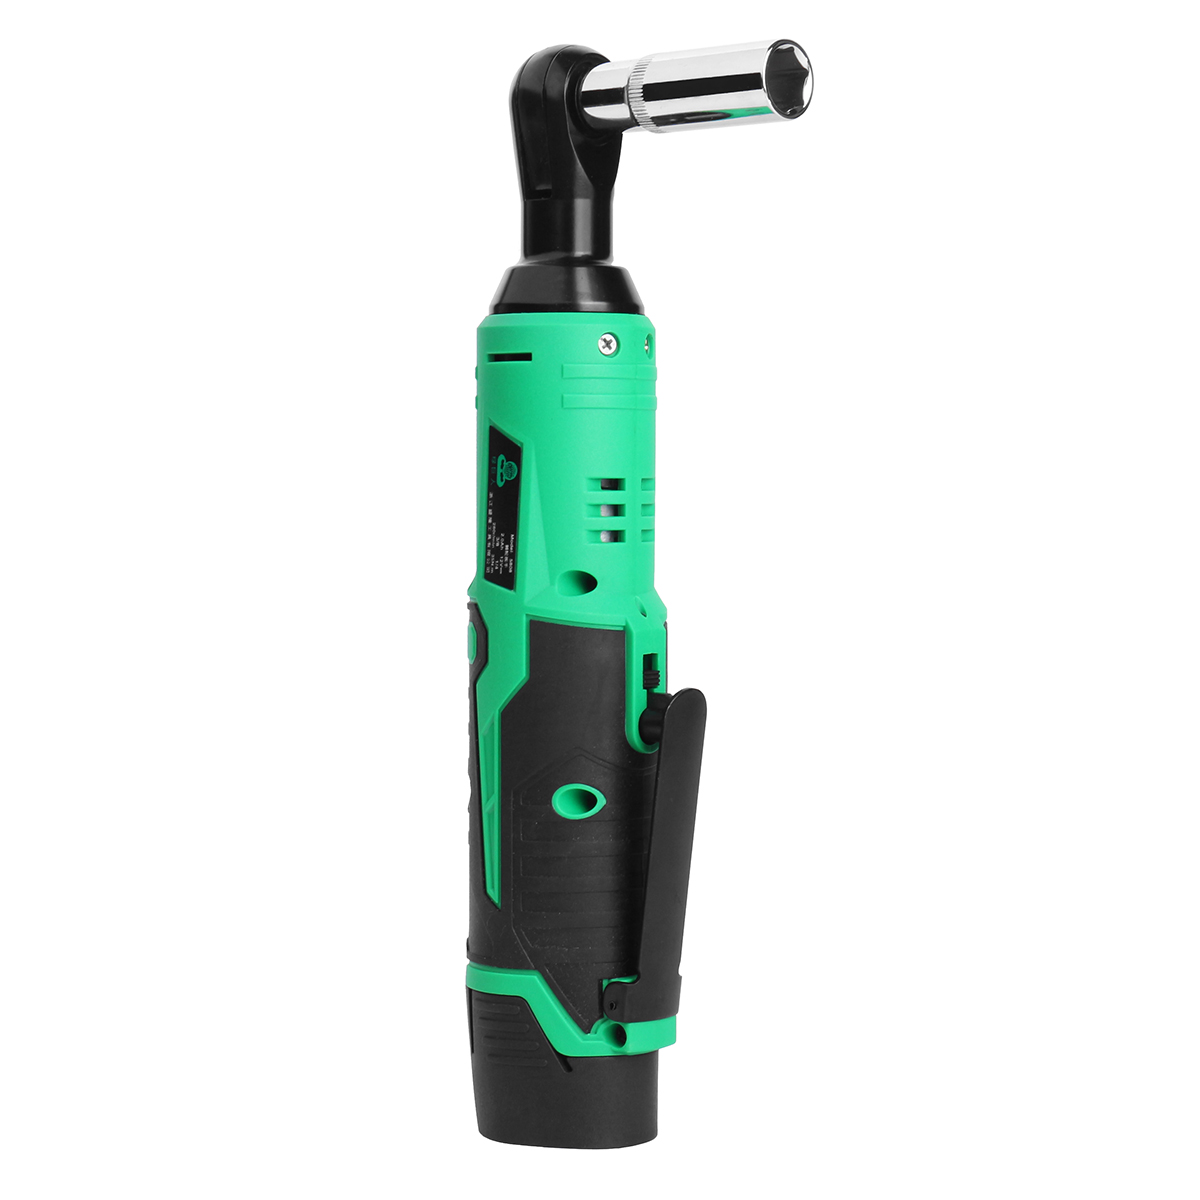 12V-38inch-Electric-Ratchet-Wrench-Rechargeable-Right-Angle-Wrench-Tool-LED-Cordless-Li-ion-Battery-1319227-1